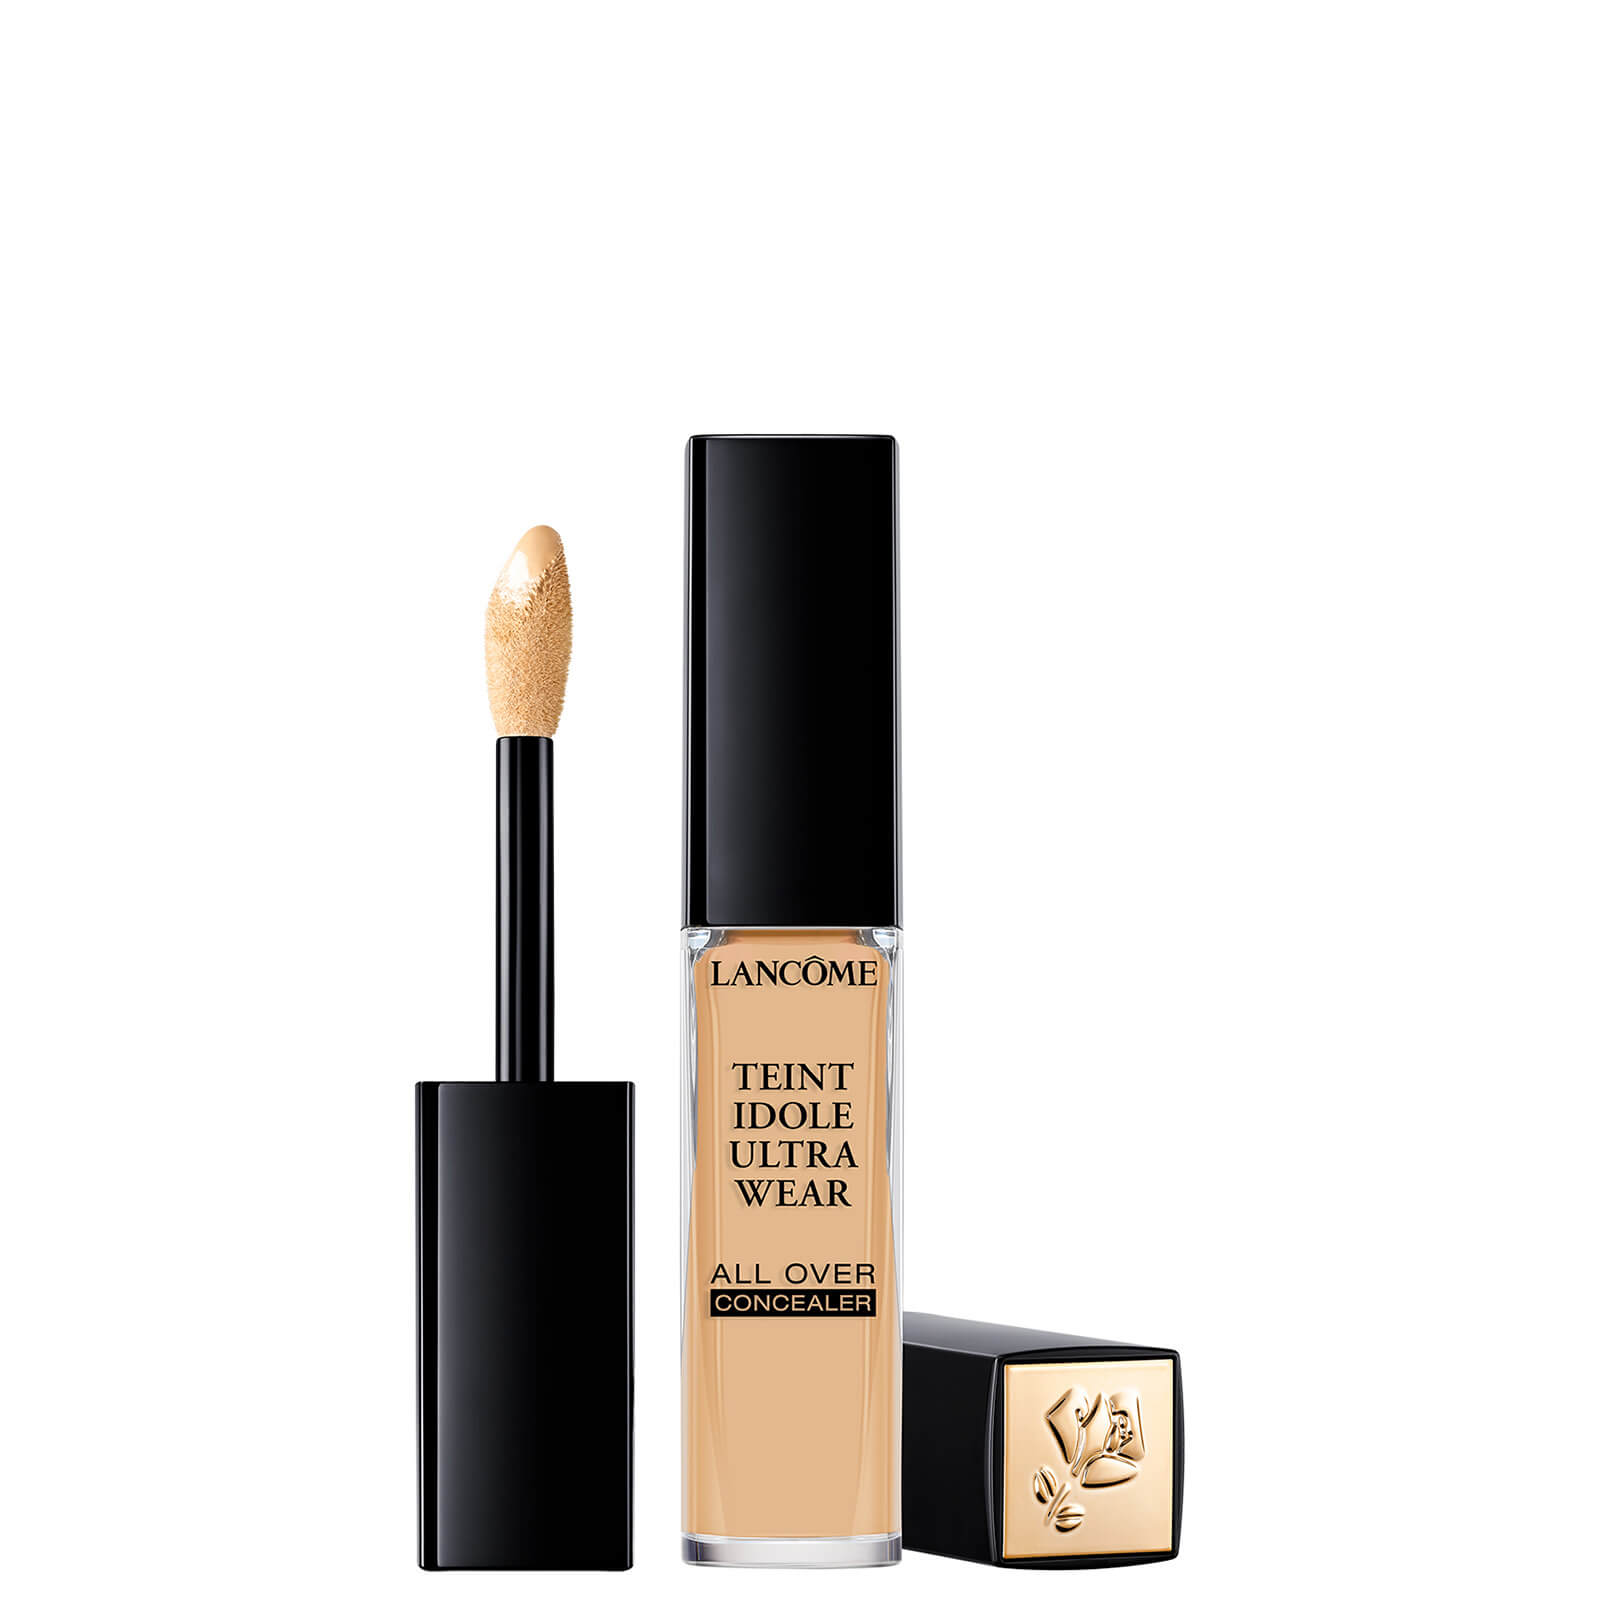 Lancome Teint Idole Ultra Wear All Over Concealer 13ml (Various Shades) - 320 Bisque W 035